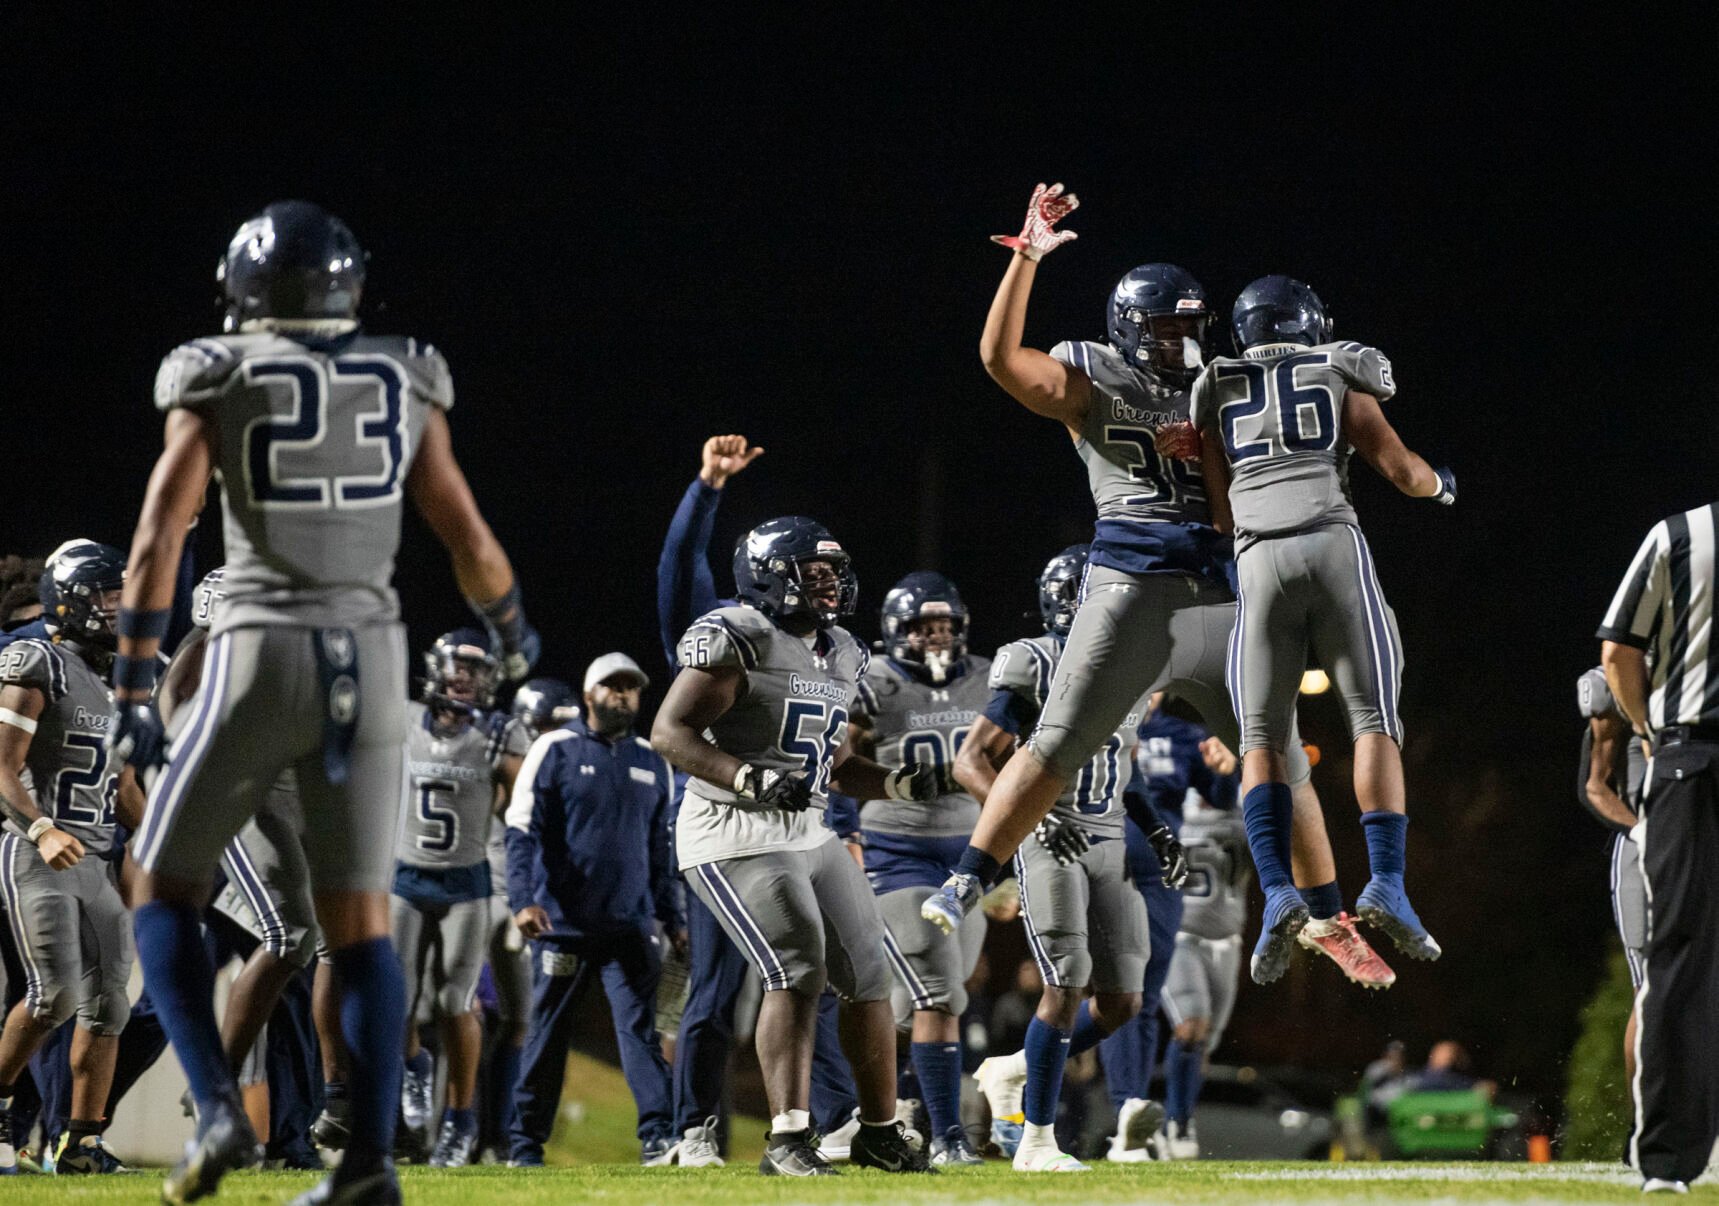 Grimsley stages impressive comeback to claim 42-35 victory over Hough